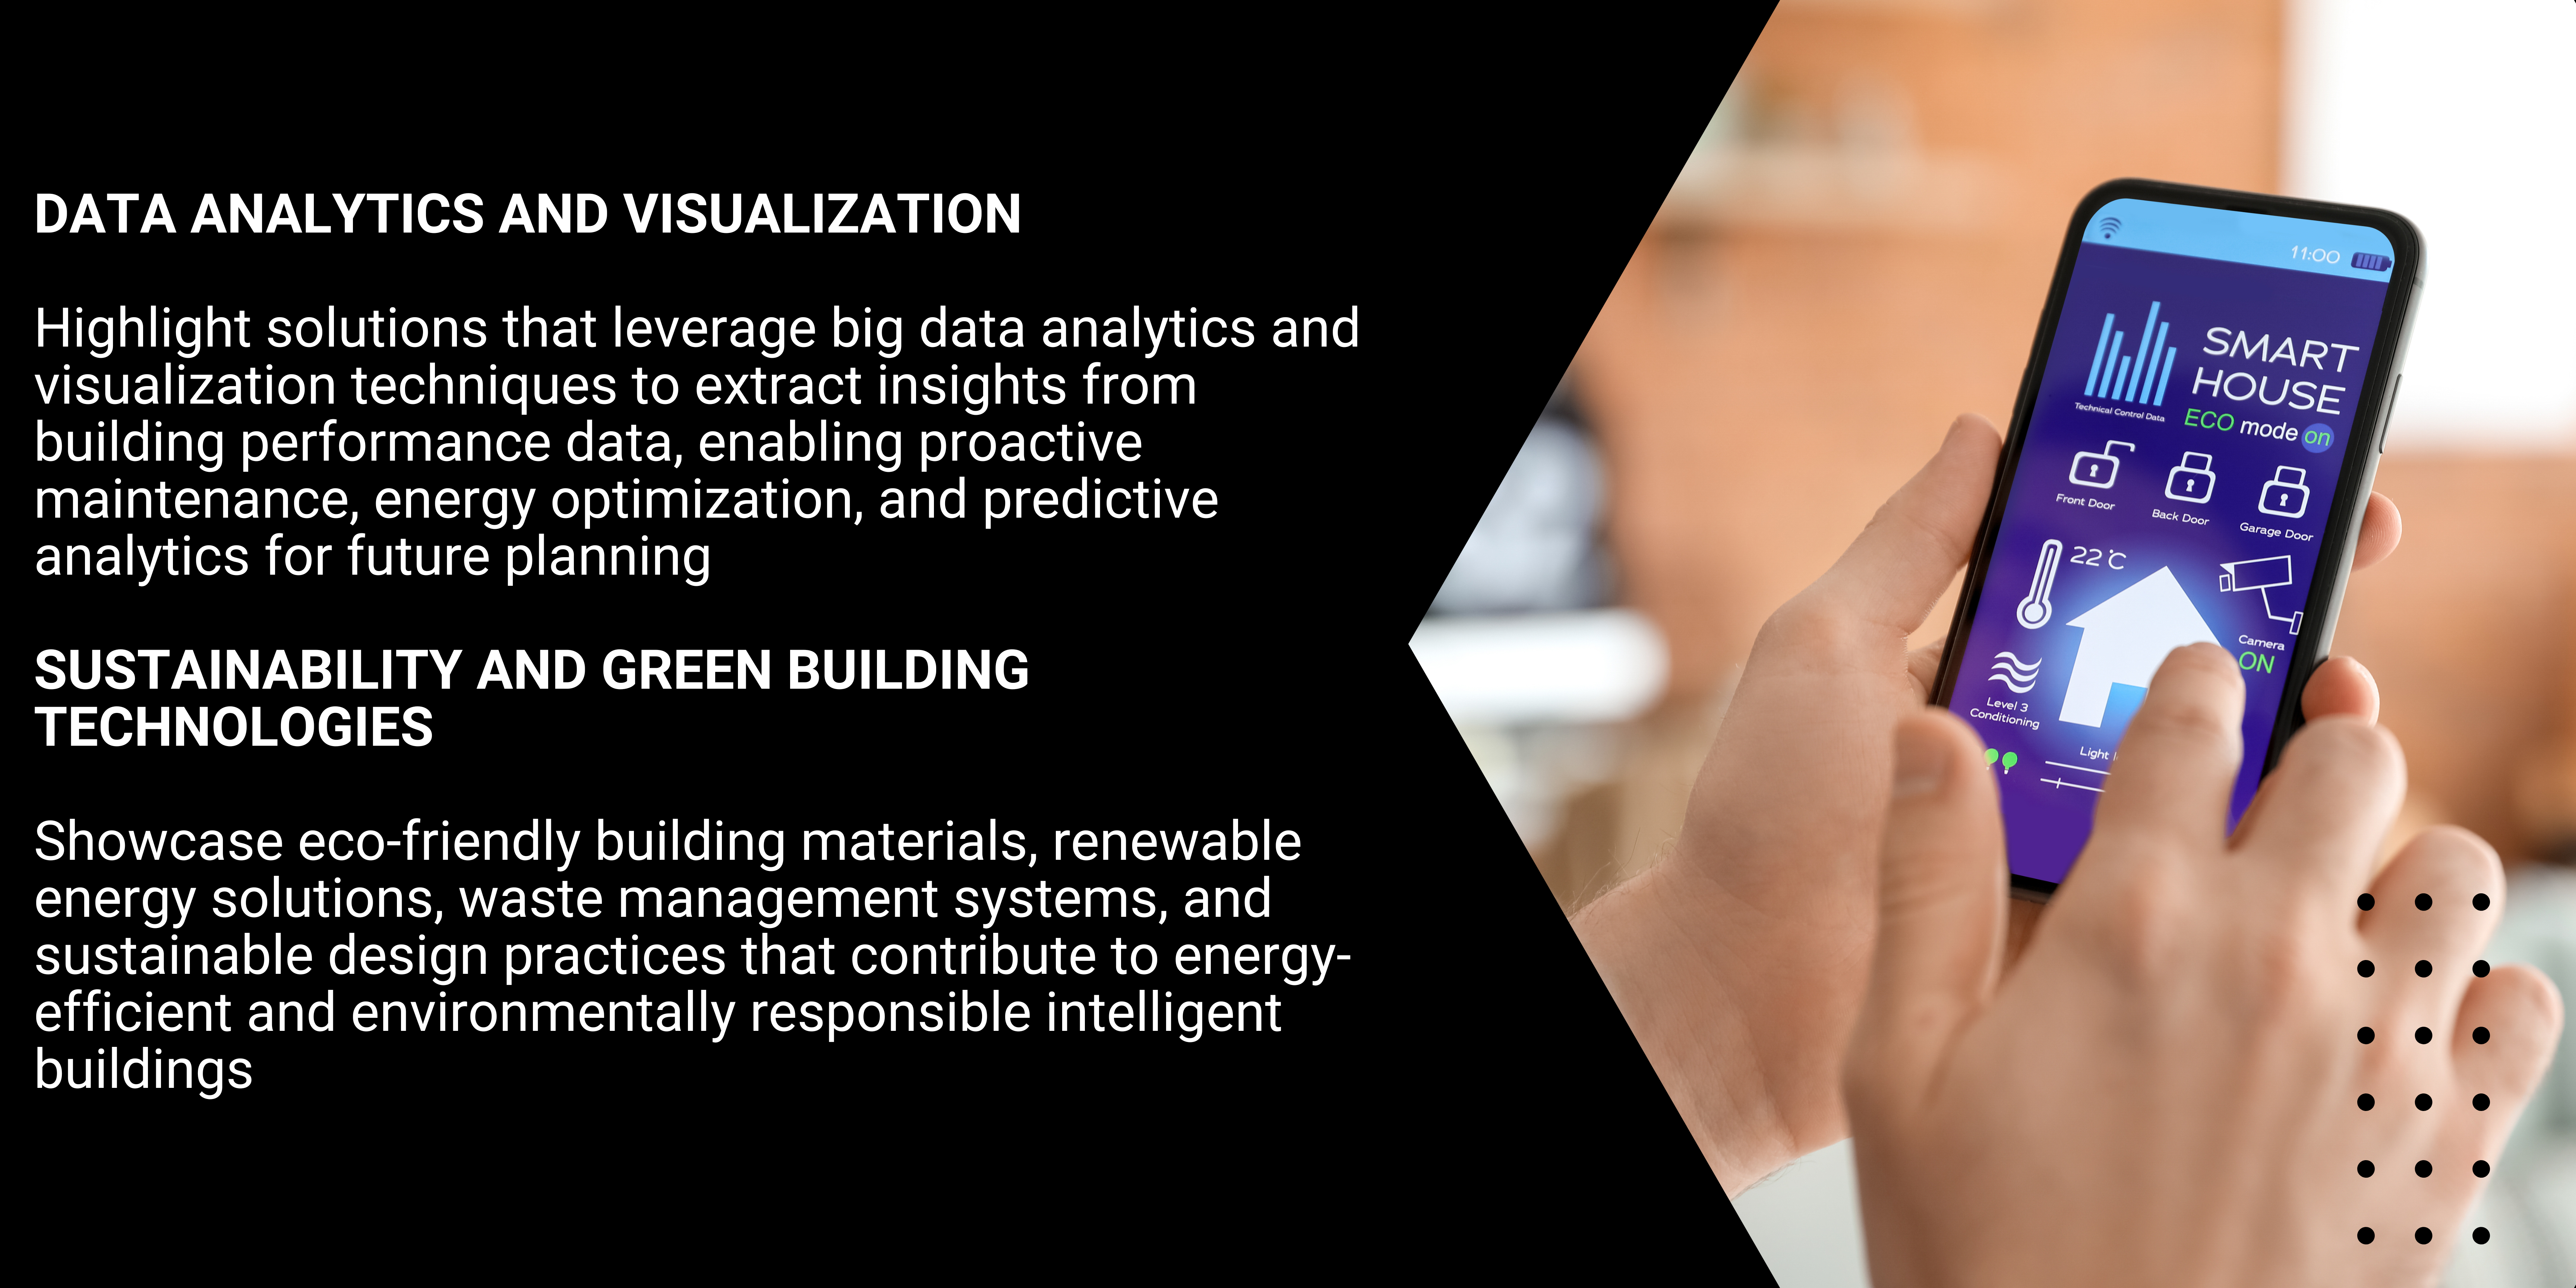 Data Analytics and Visualization and Sustainability and Green Building Technologies